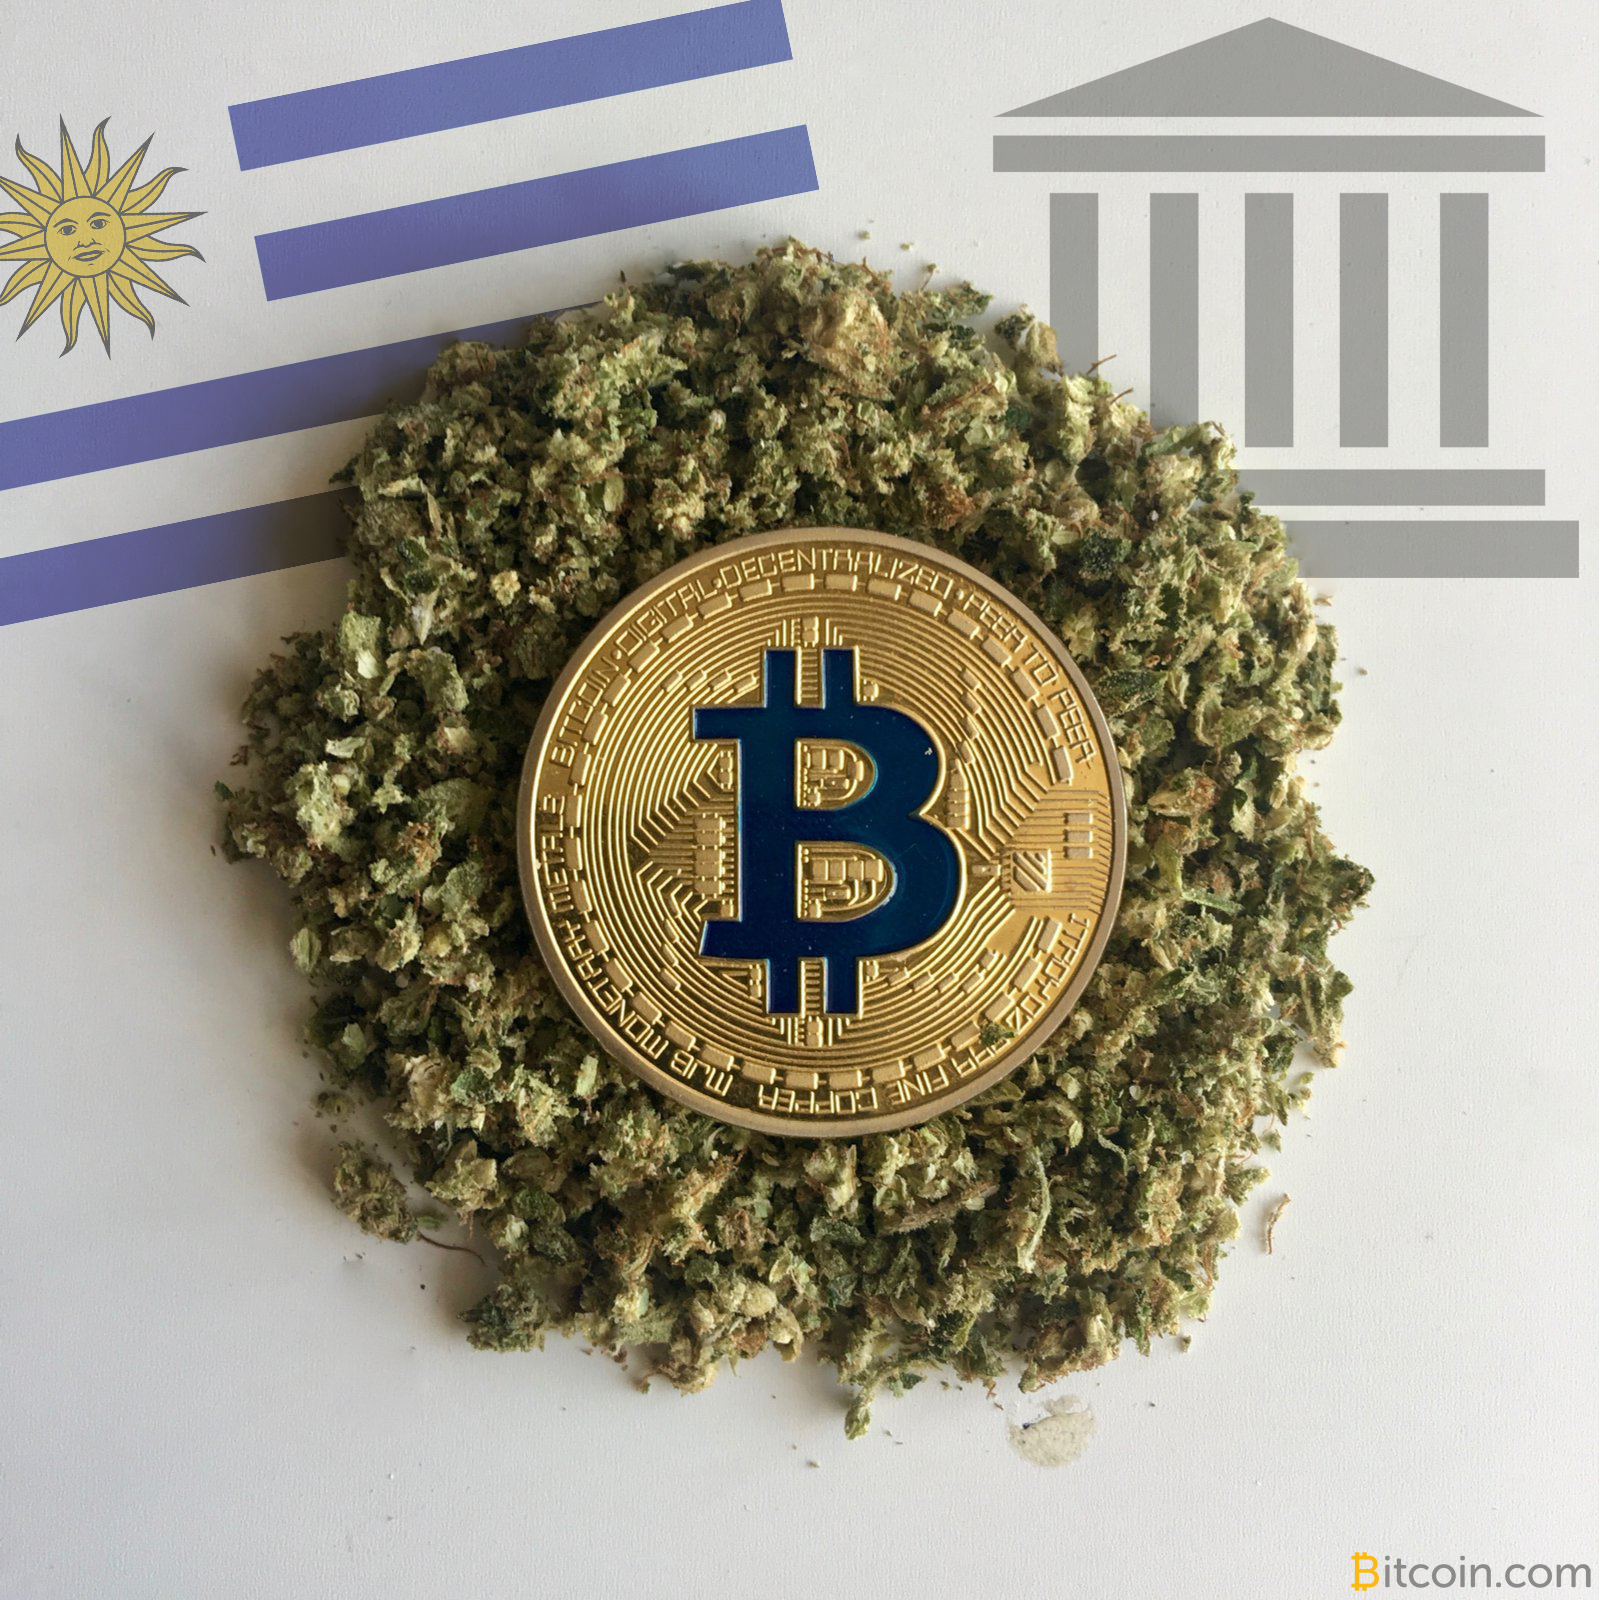 Uruguay Urged to Provide Services to Cannabusiness – Or Bitcoin Will